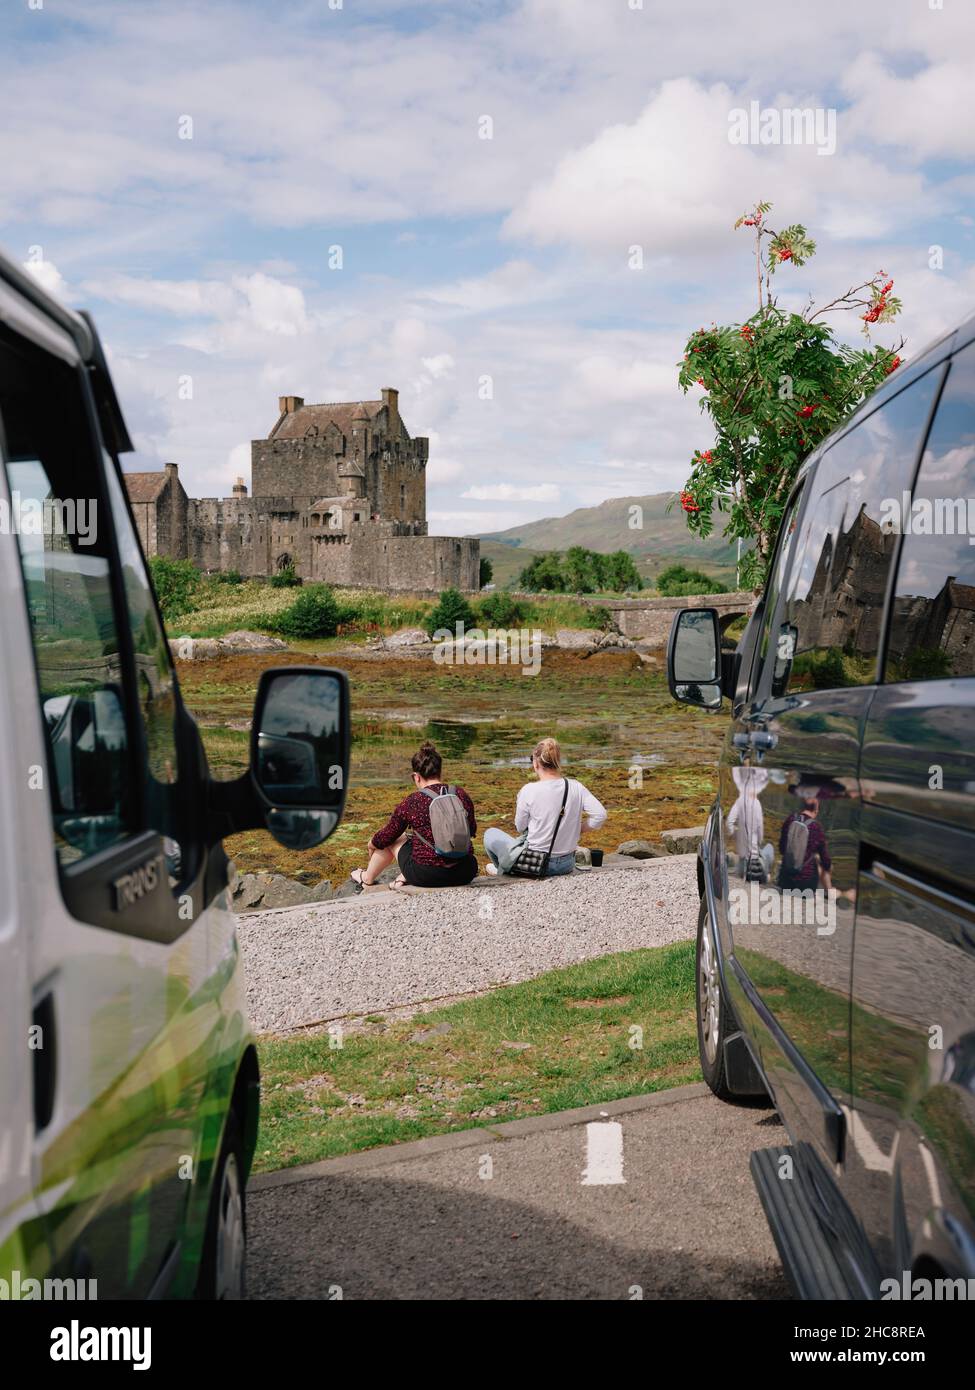 Visiting summer tourists relaxing on a summers day at Eilean Donan castle in Loch Duich, Kyle of Lochalsh, West Highlands Scotland UK Stock Photo